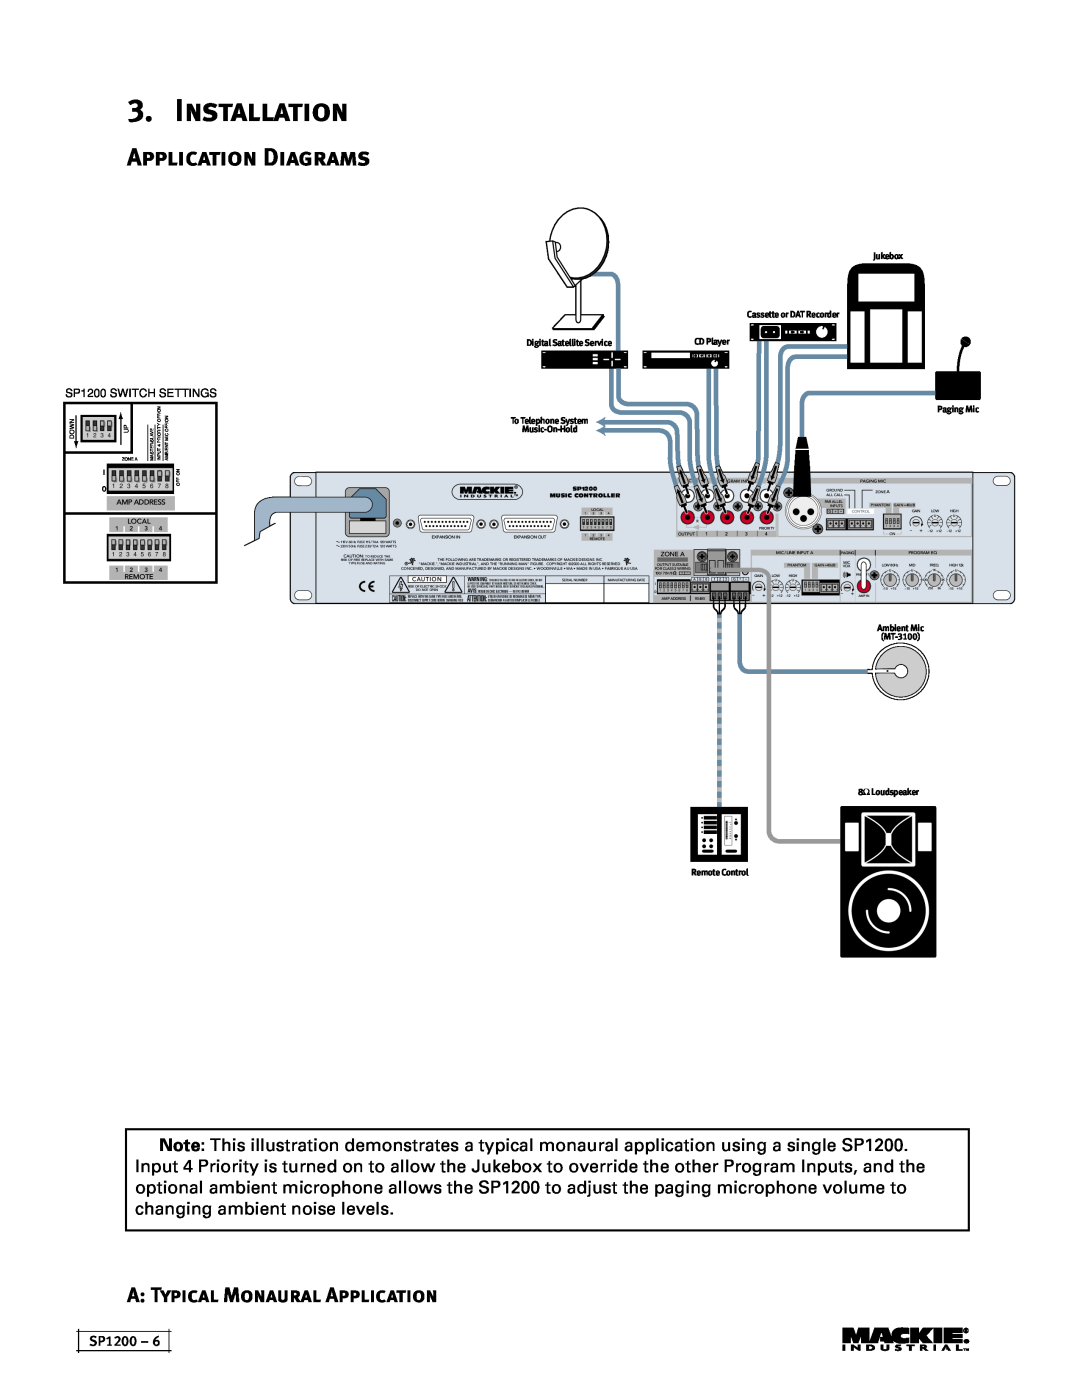 Mackie Installation, Application Diagrams, A Typical Monaural Application, SP1200 SWITCH SETTINGS, Paging Mic 